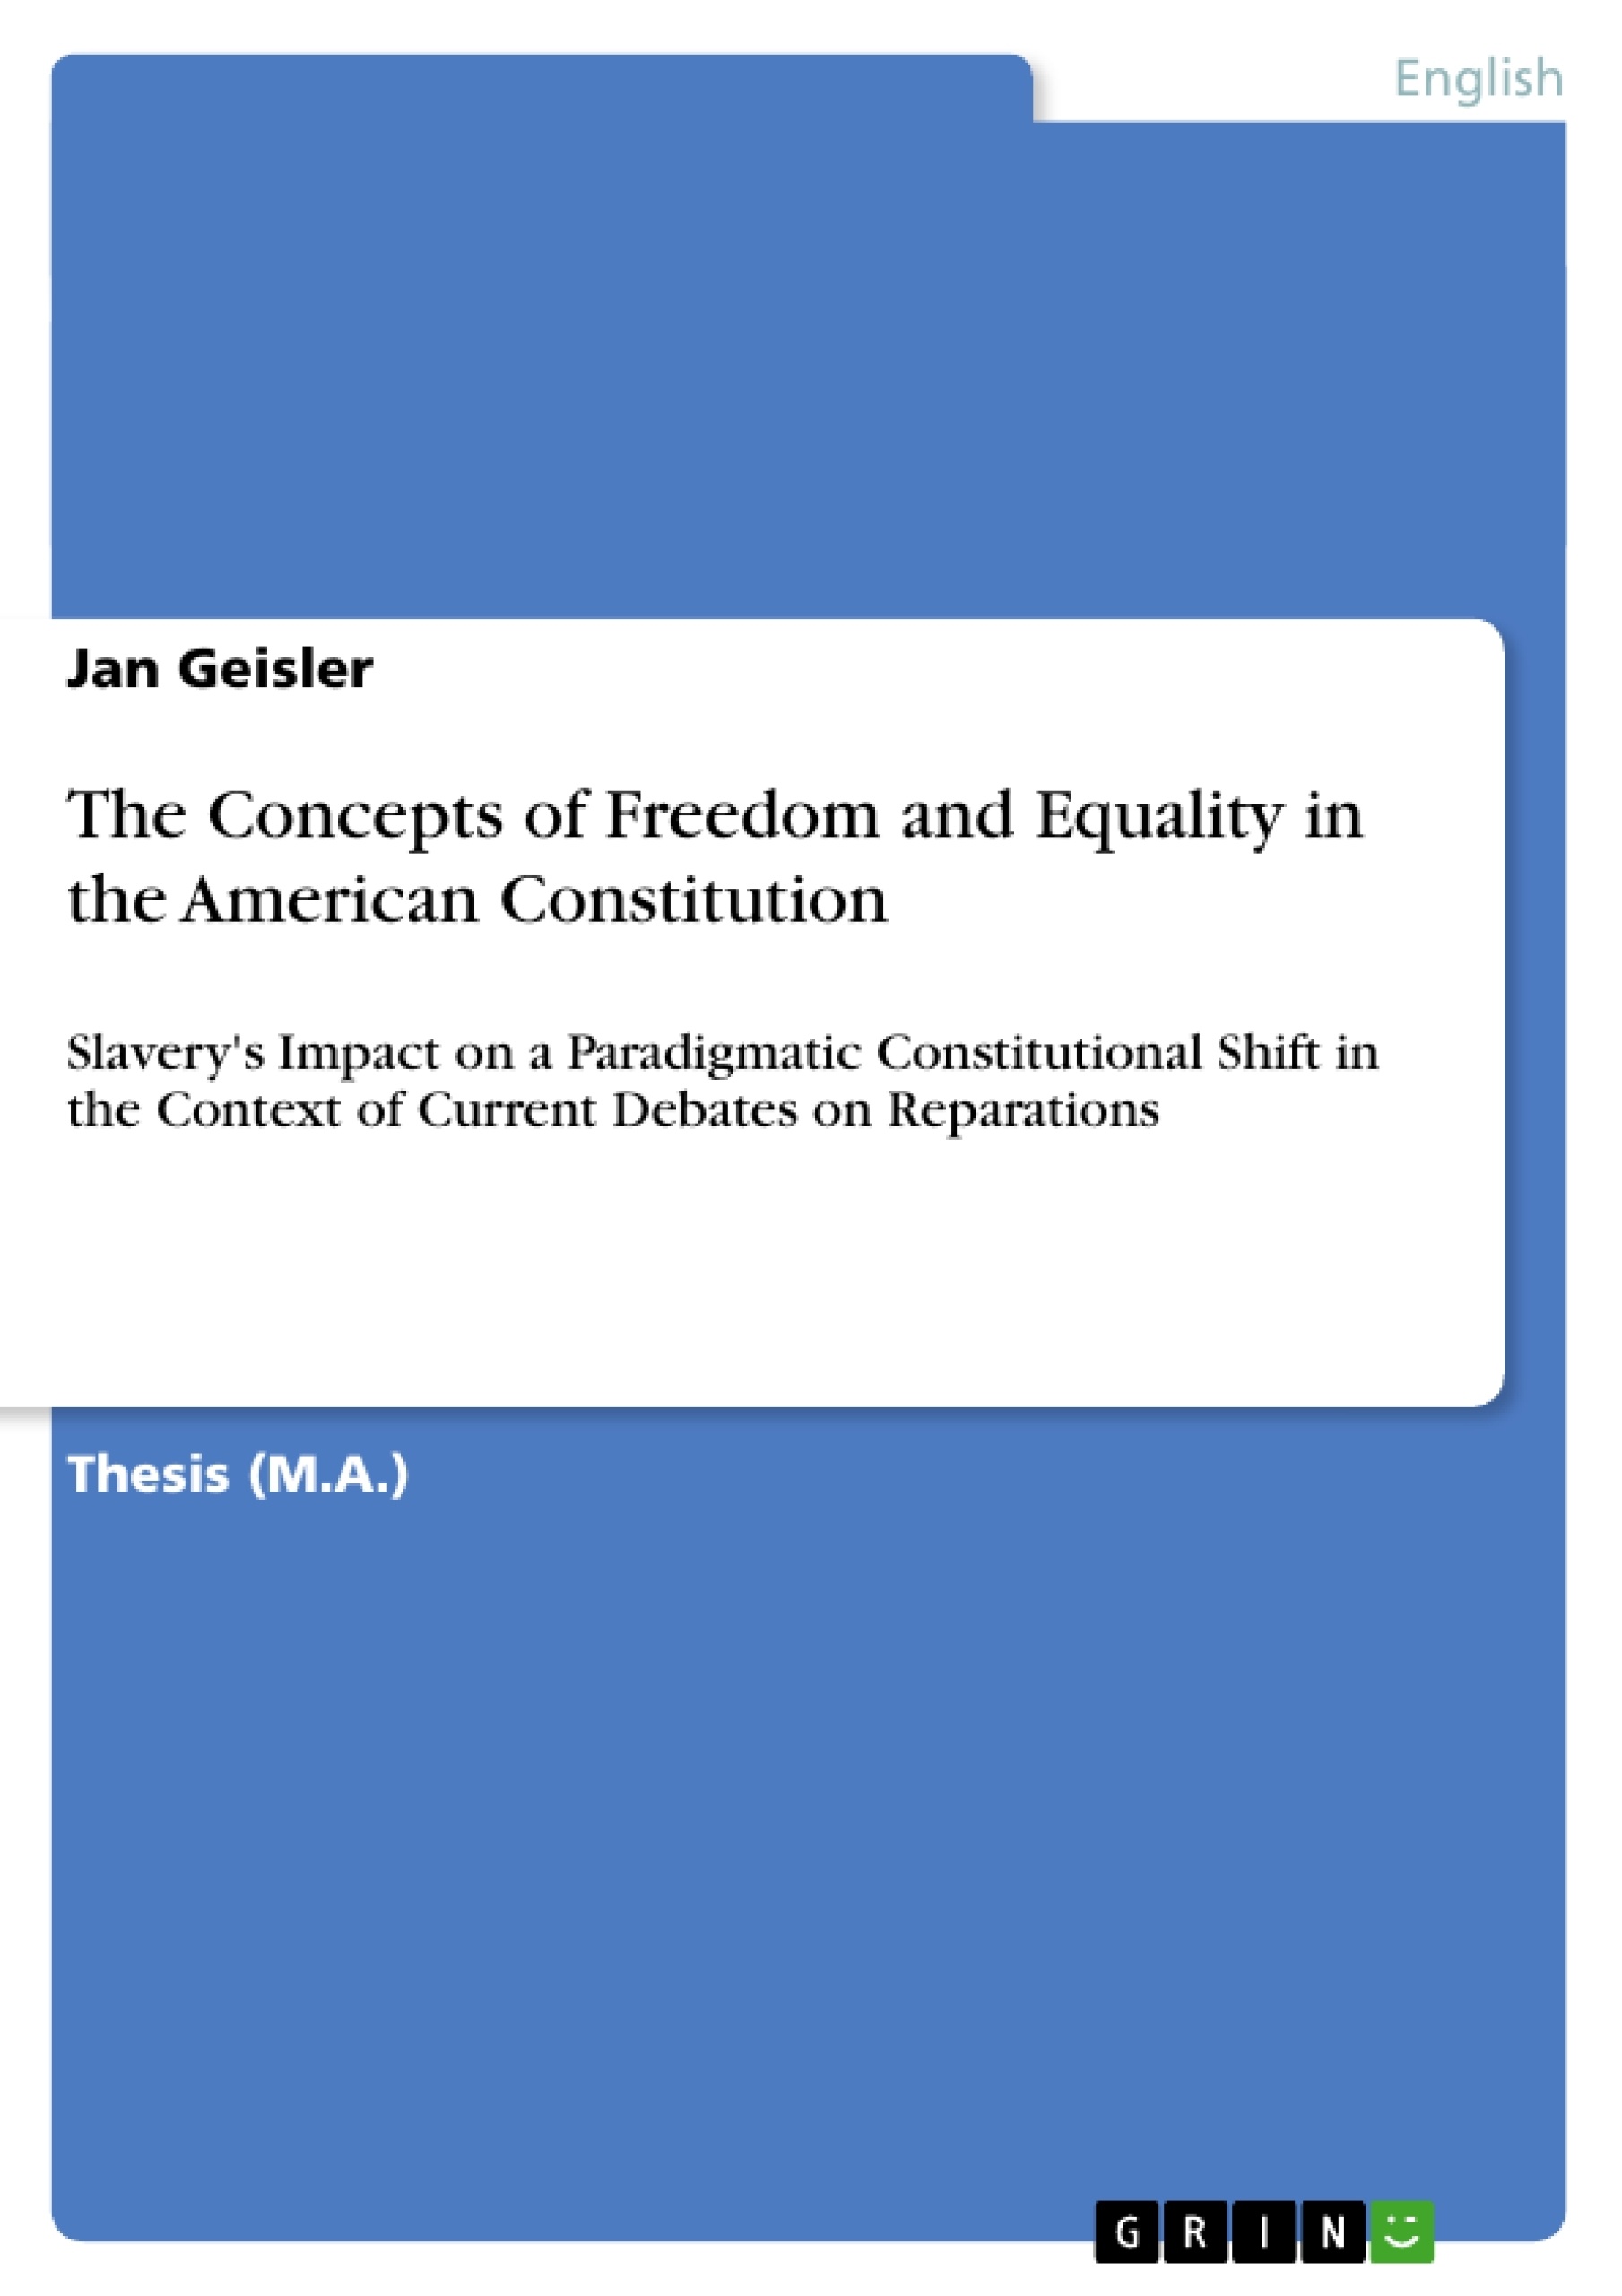 Título: The Concepts of Freedom and Equality in the American Constitution